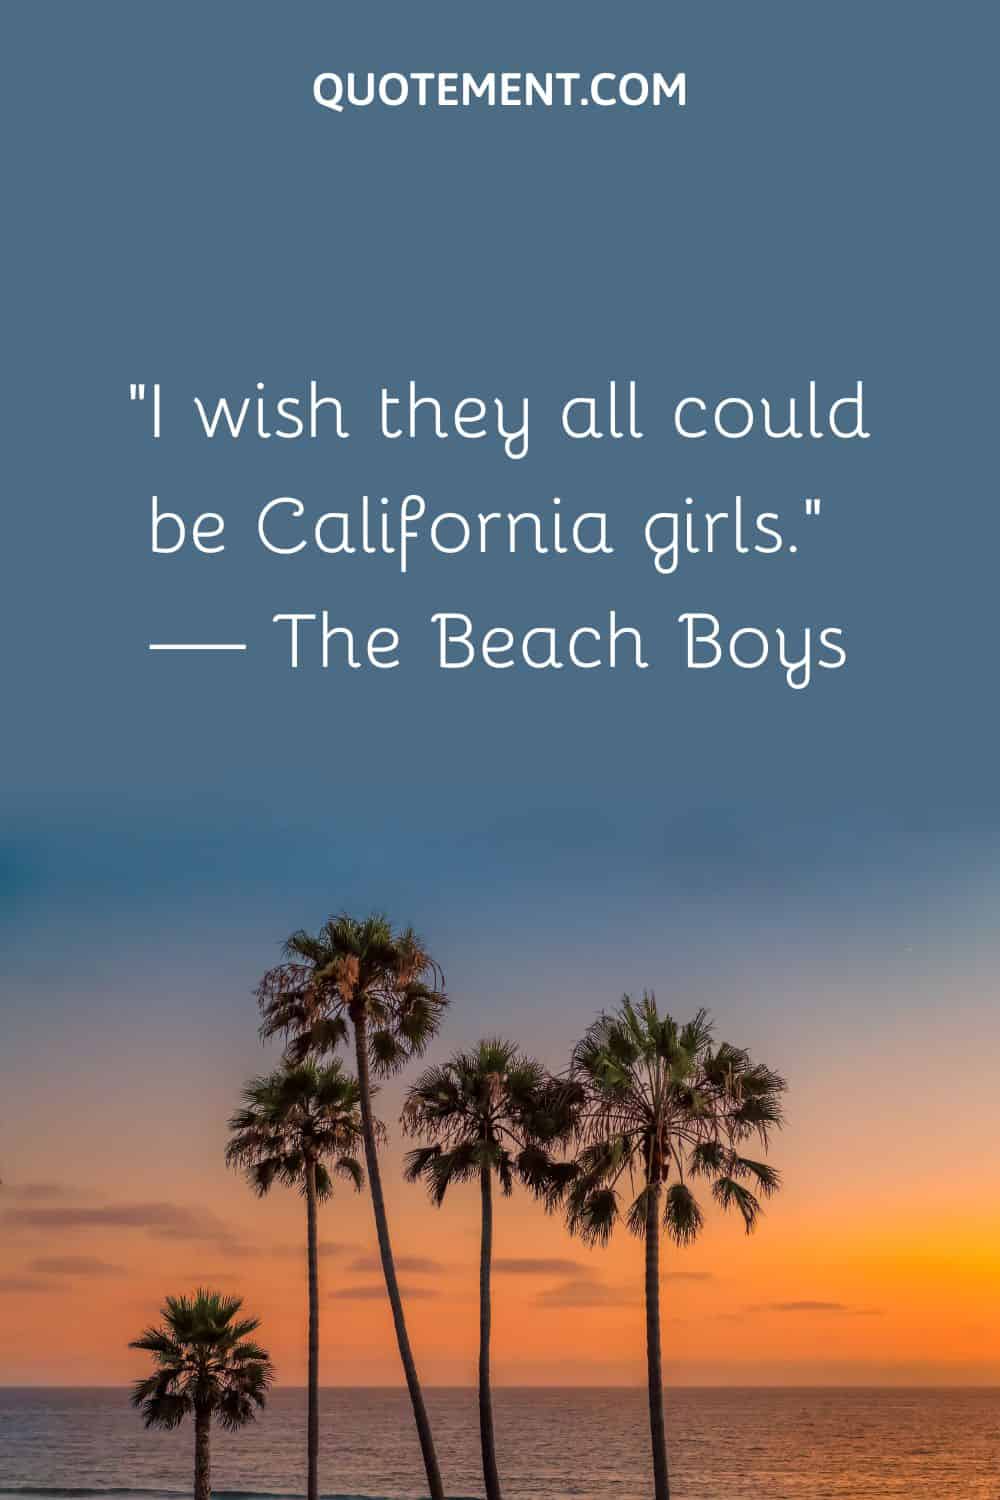 I wish they all could be California girls